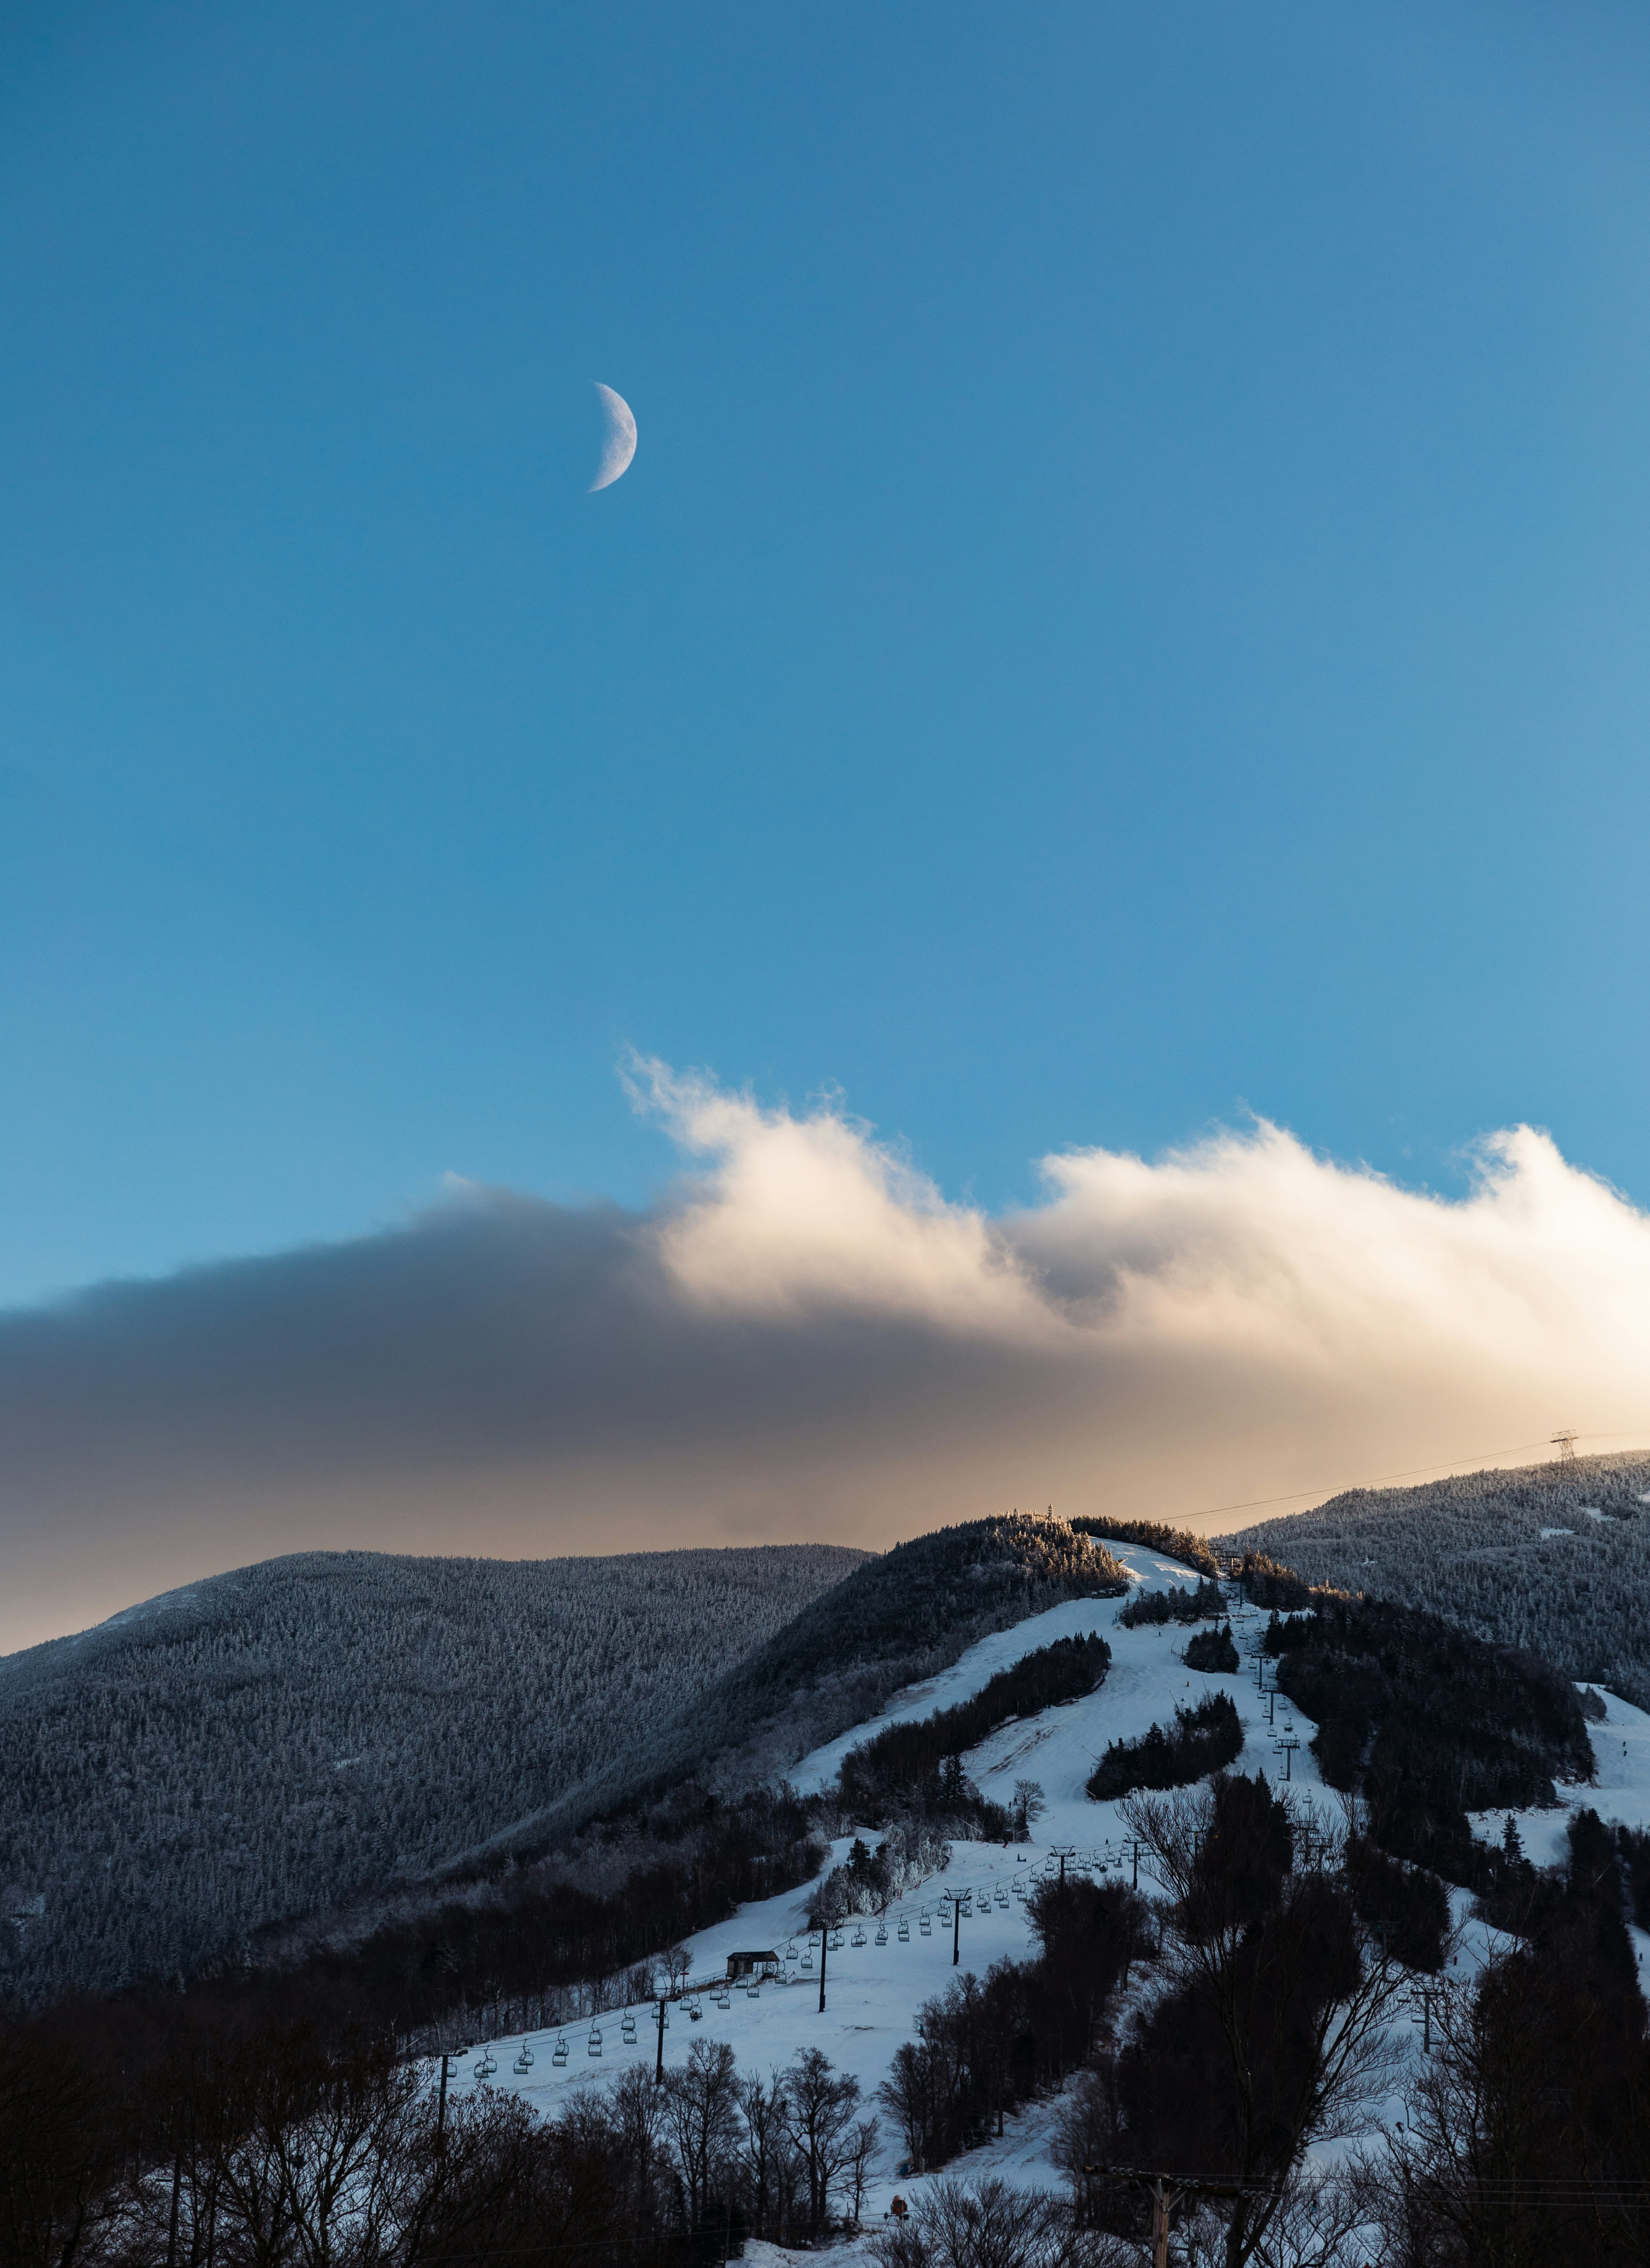 snow and plant covered mountain under crescent moon during daytime